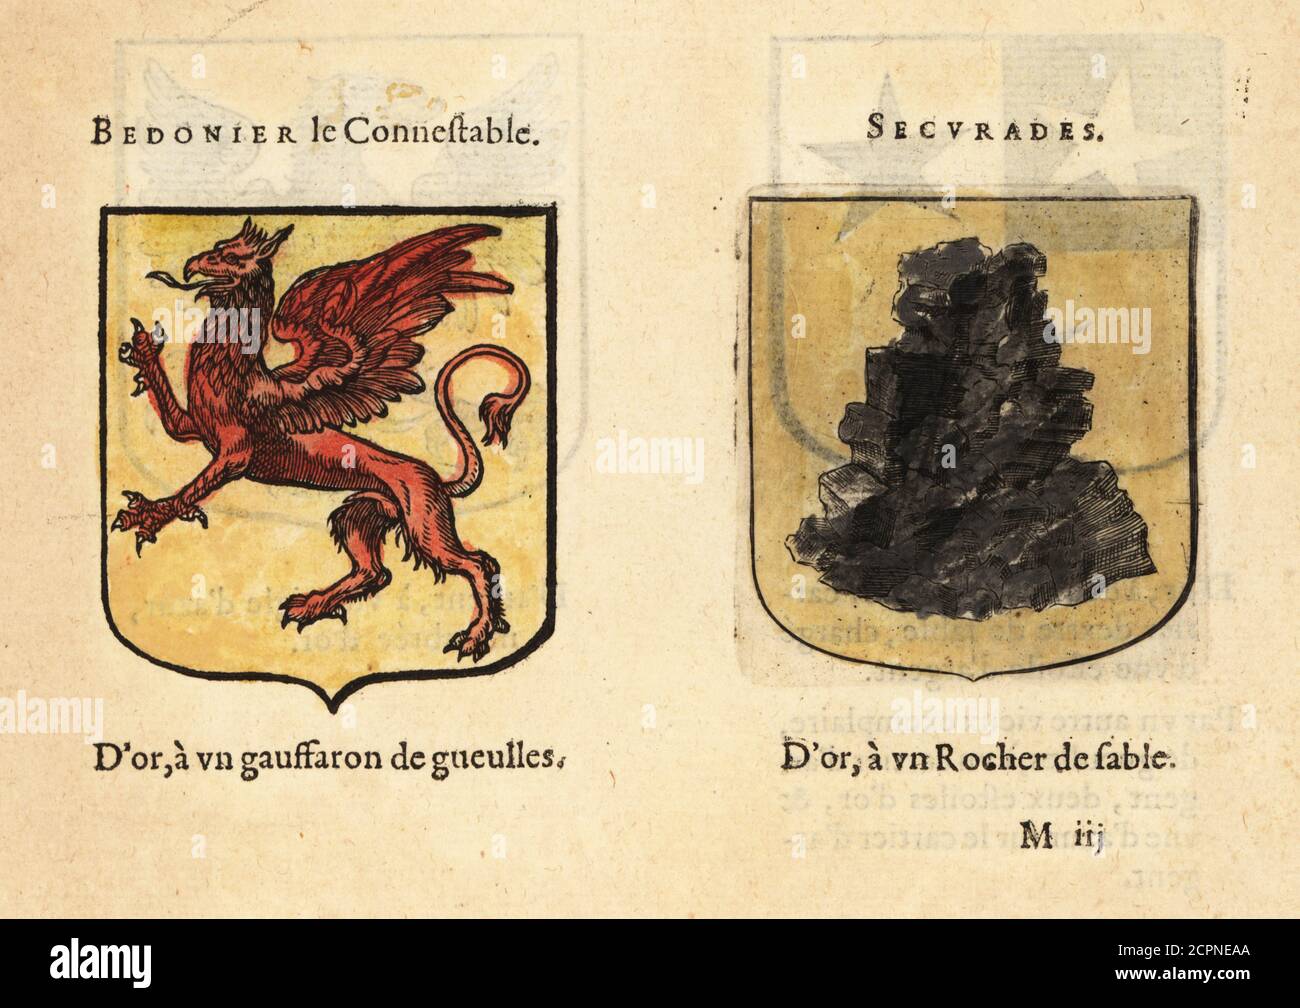 Imaginary coats of arms of the First Chapter of King Arthur’s Knights of the Round Table: Bedonier the Constable with red griffon, and Segurades de Mont Grand, with black rock. Chevaliers de la table ronde: BEDONIER le Connestable, SECURADES. Handcoloured woodblock engraving from Hierosme de Bara’s Le Blason des Armoiries, Chez Rolet Boutonne, Paris, 1628 Stock Photo